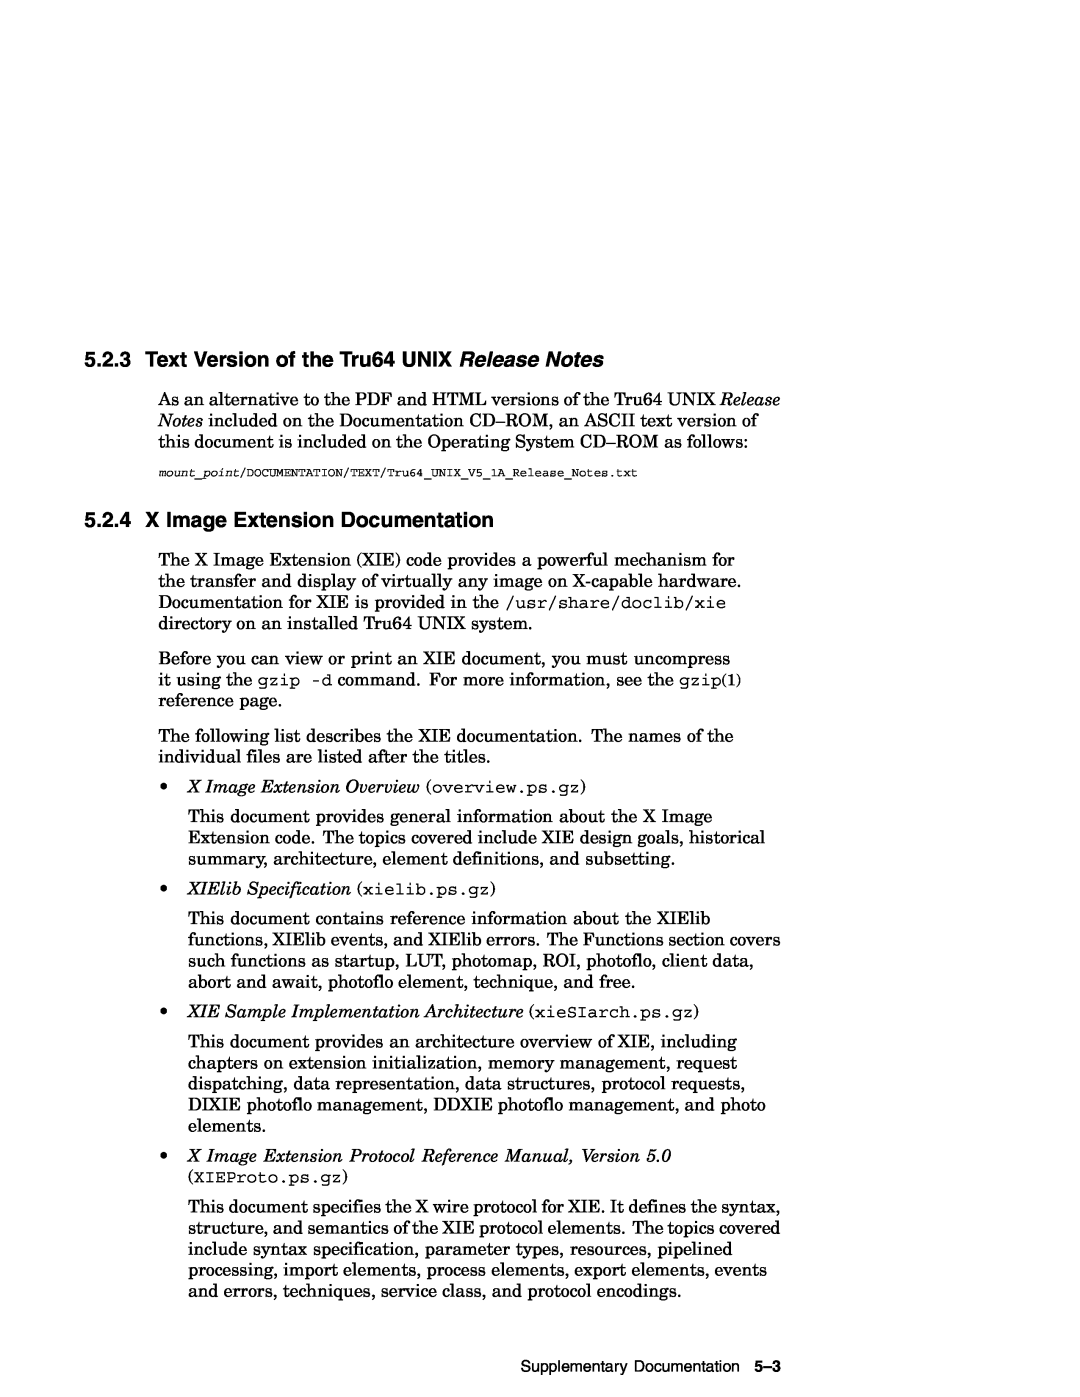 Compaq AA-RH8RD-TE manual Text Version of the Tru64 UNIX Release Notes, X Image Extension Documentation 